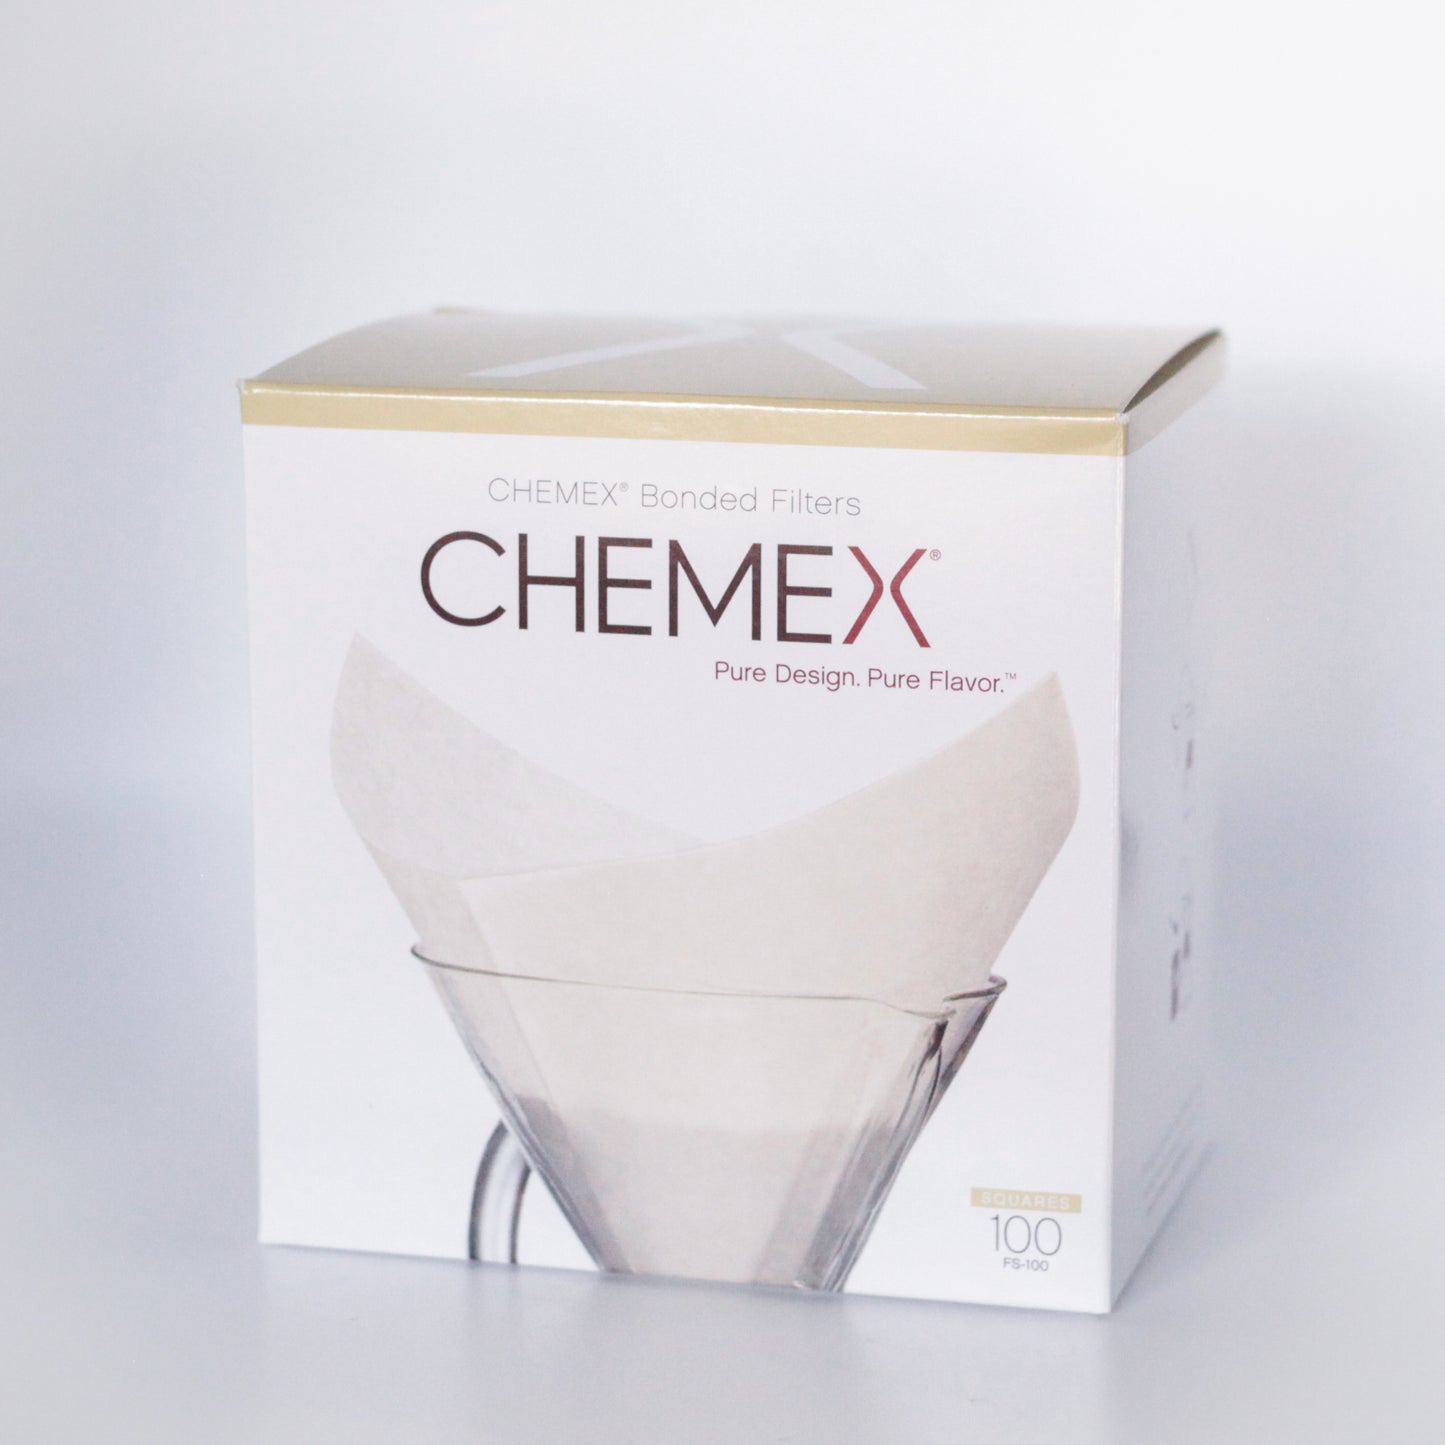 Chemex Bonded Filters 100 ct